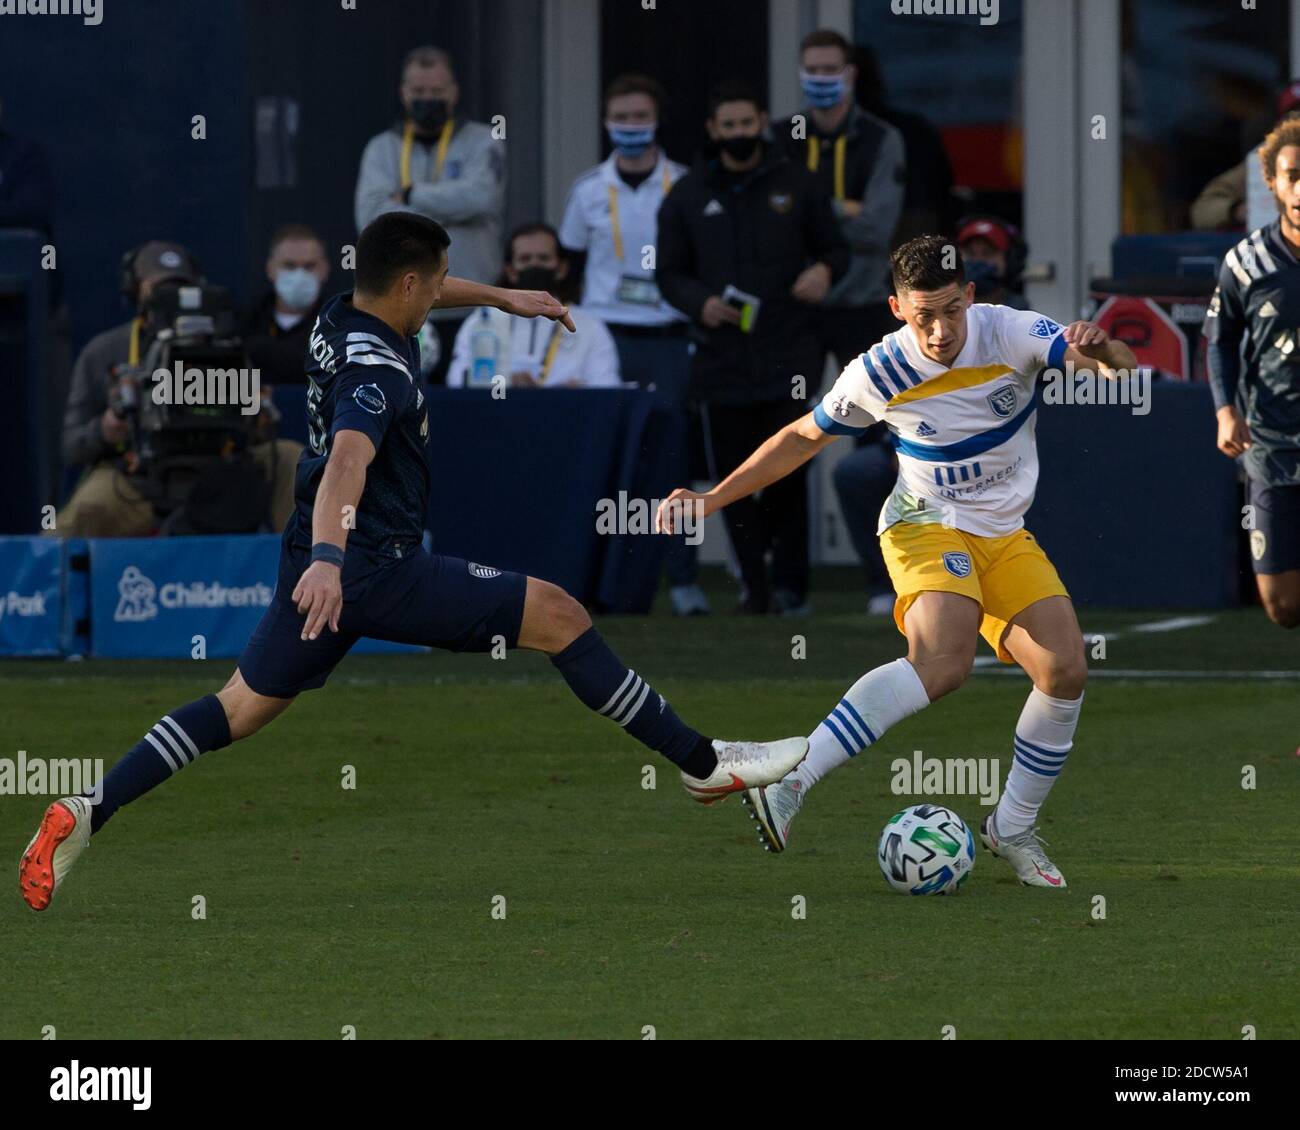 Kansas City, Kansas, USA. 21st Nov, 2020. Sporting KC midfielder Roger Espinoza #15 (l) makes an offensive tackle for sideline advantage against San Jose Earthquakes midfielder Cristian Espinoza #10 (r) during the second half of the game. Credit: Serena S.Y. Hsu/ZUMA Wire/Alamy Live News Stock Photo